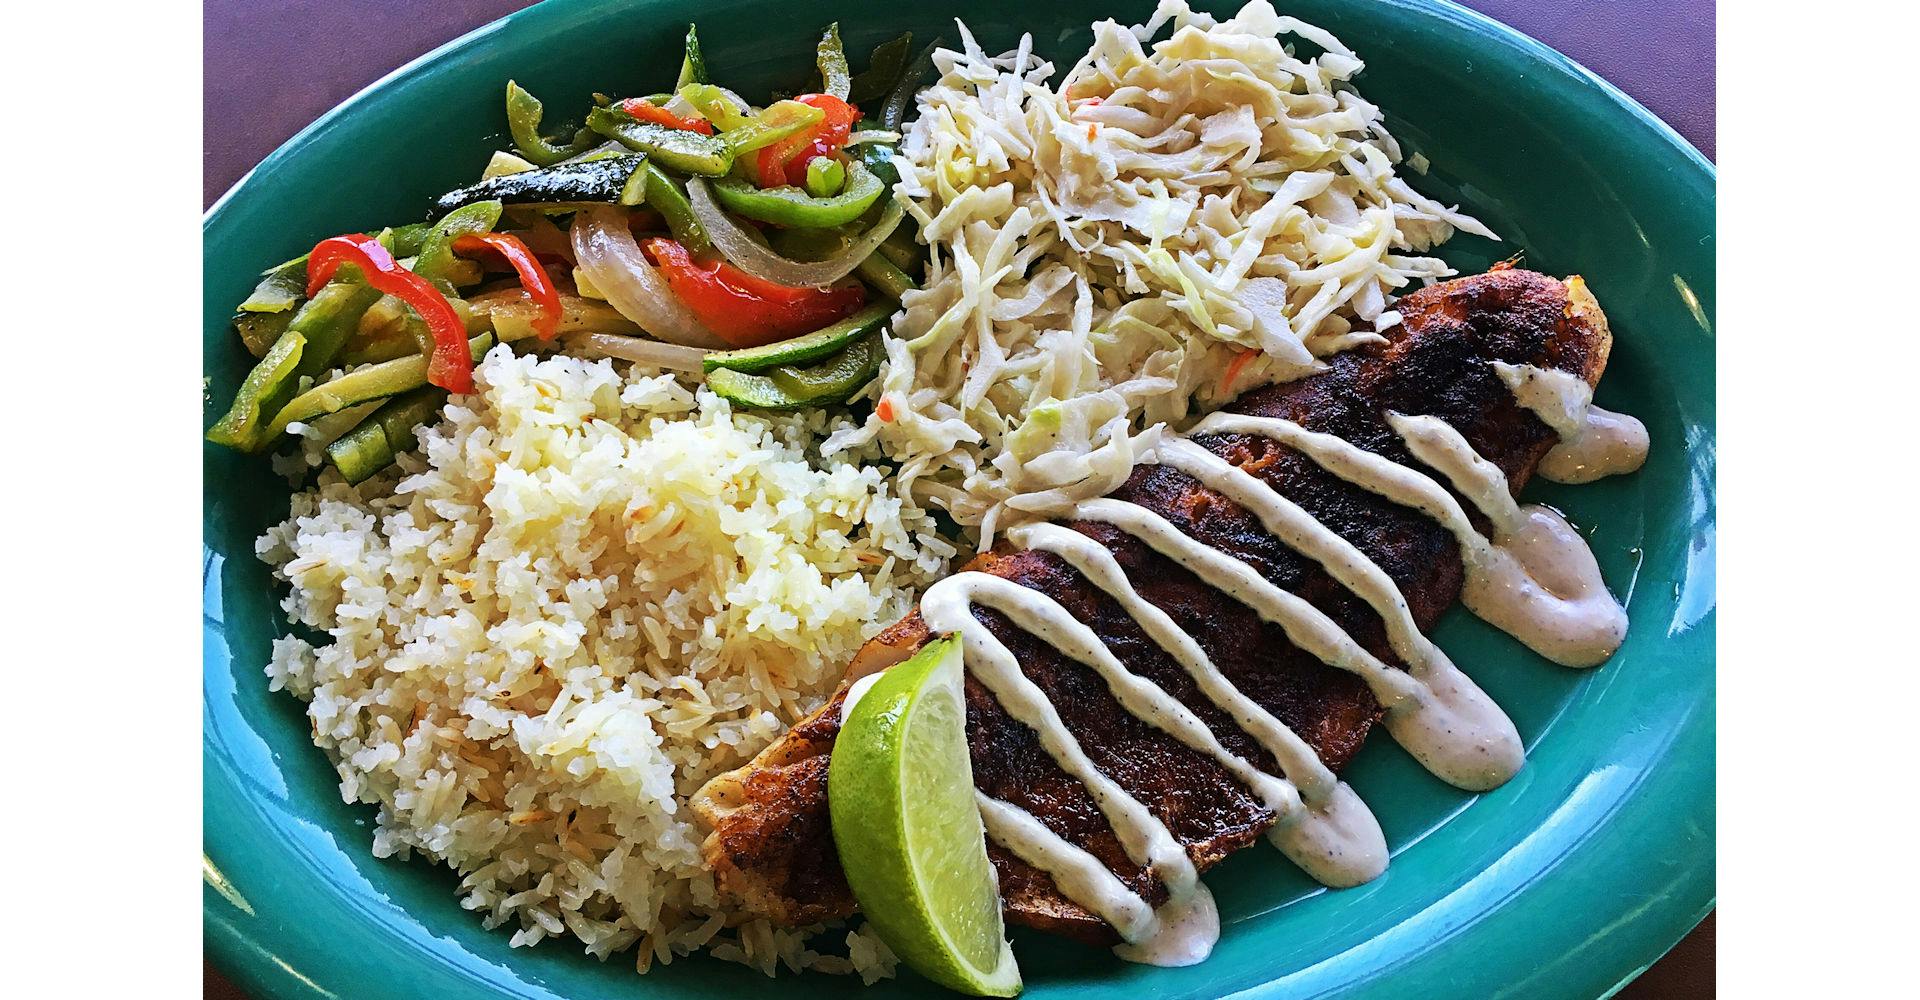 Walleye Fish Special from Silly Serrano Mexican Restaurant in Eau Claire, WI